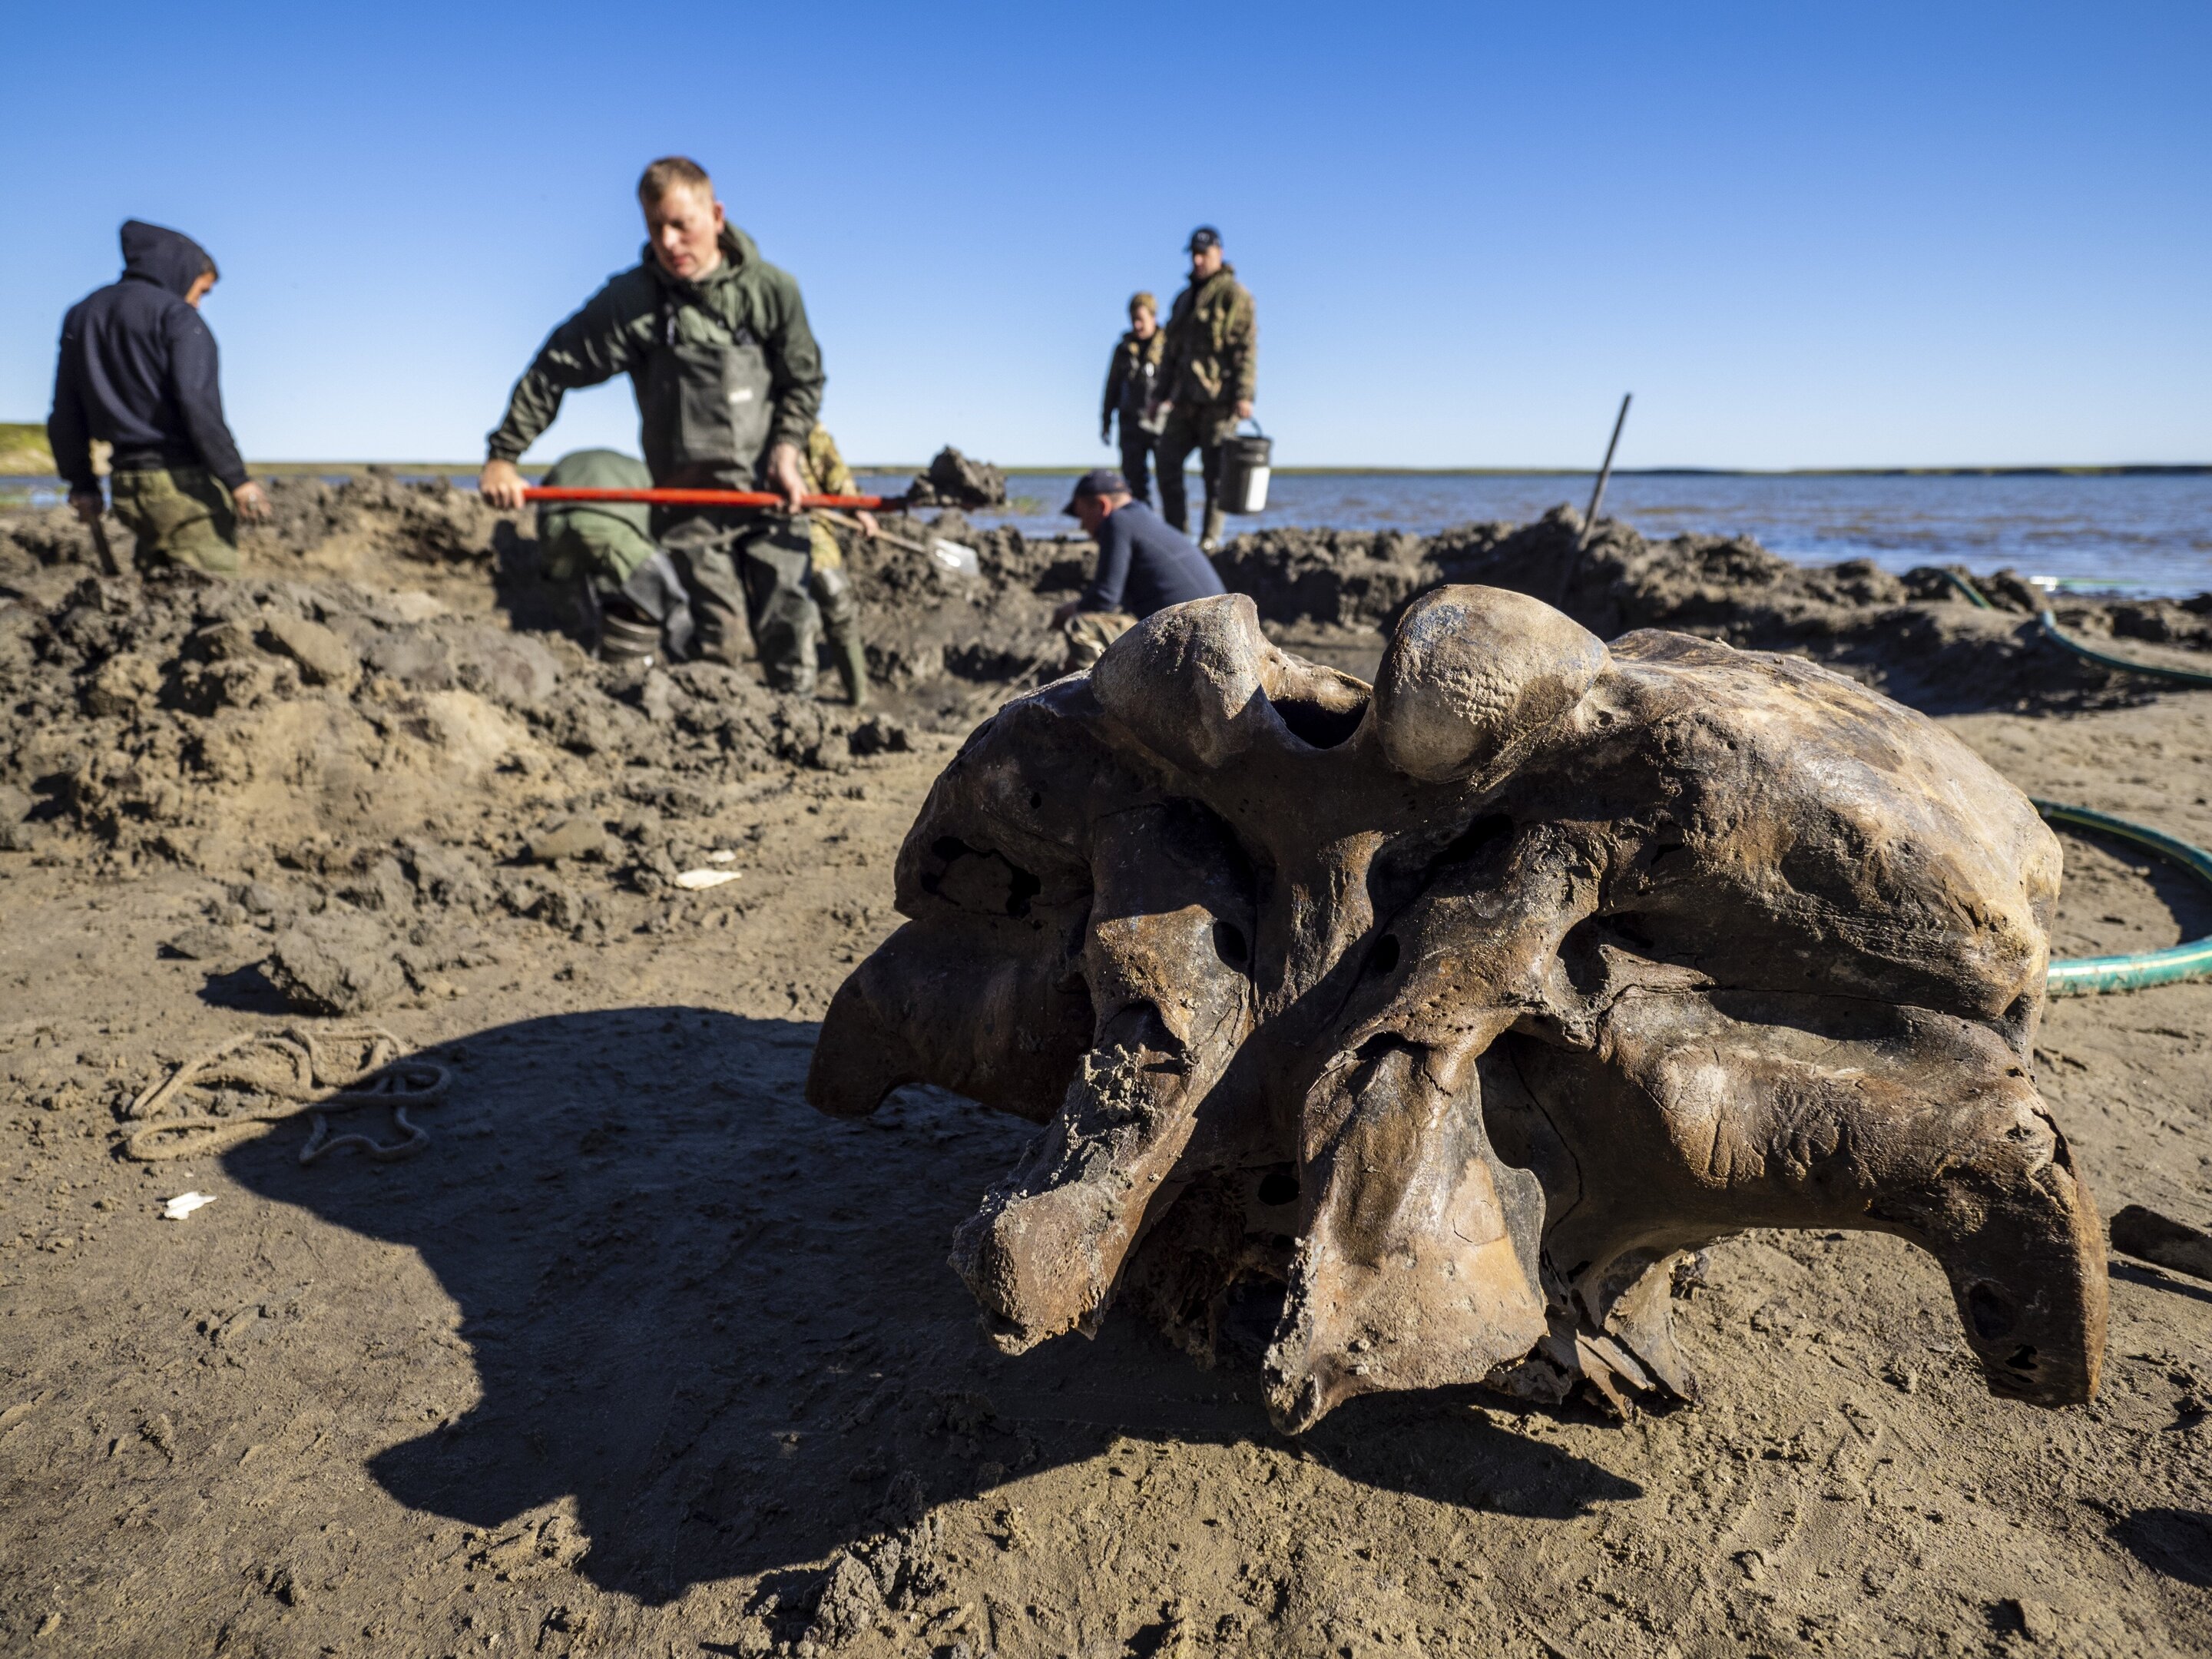  Archaeologists unearth a 20,000-year-old woolly mammoth skeleton in Kyrgyzstan.